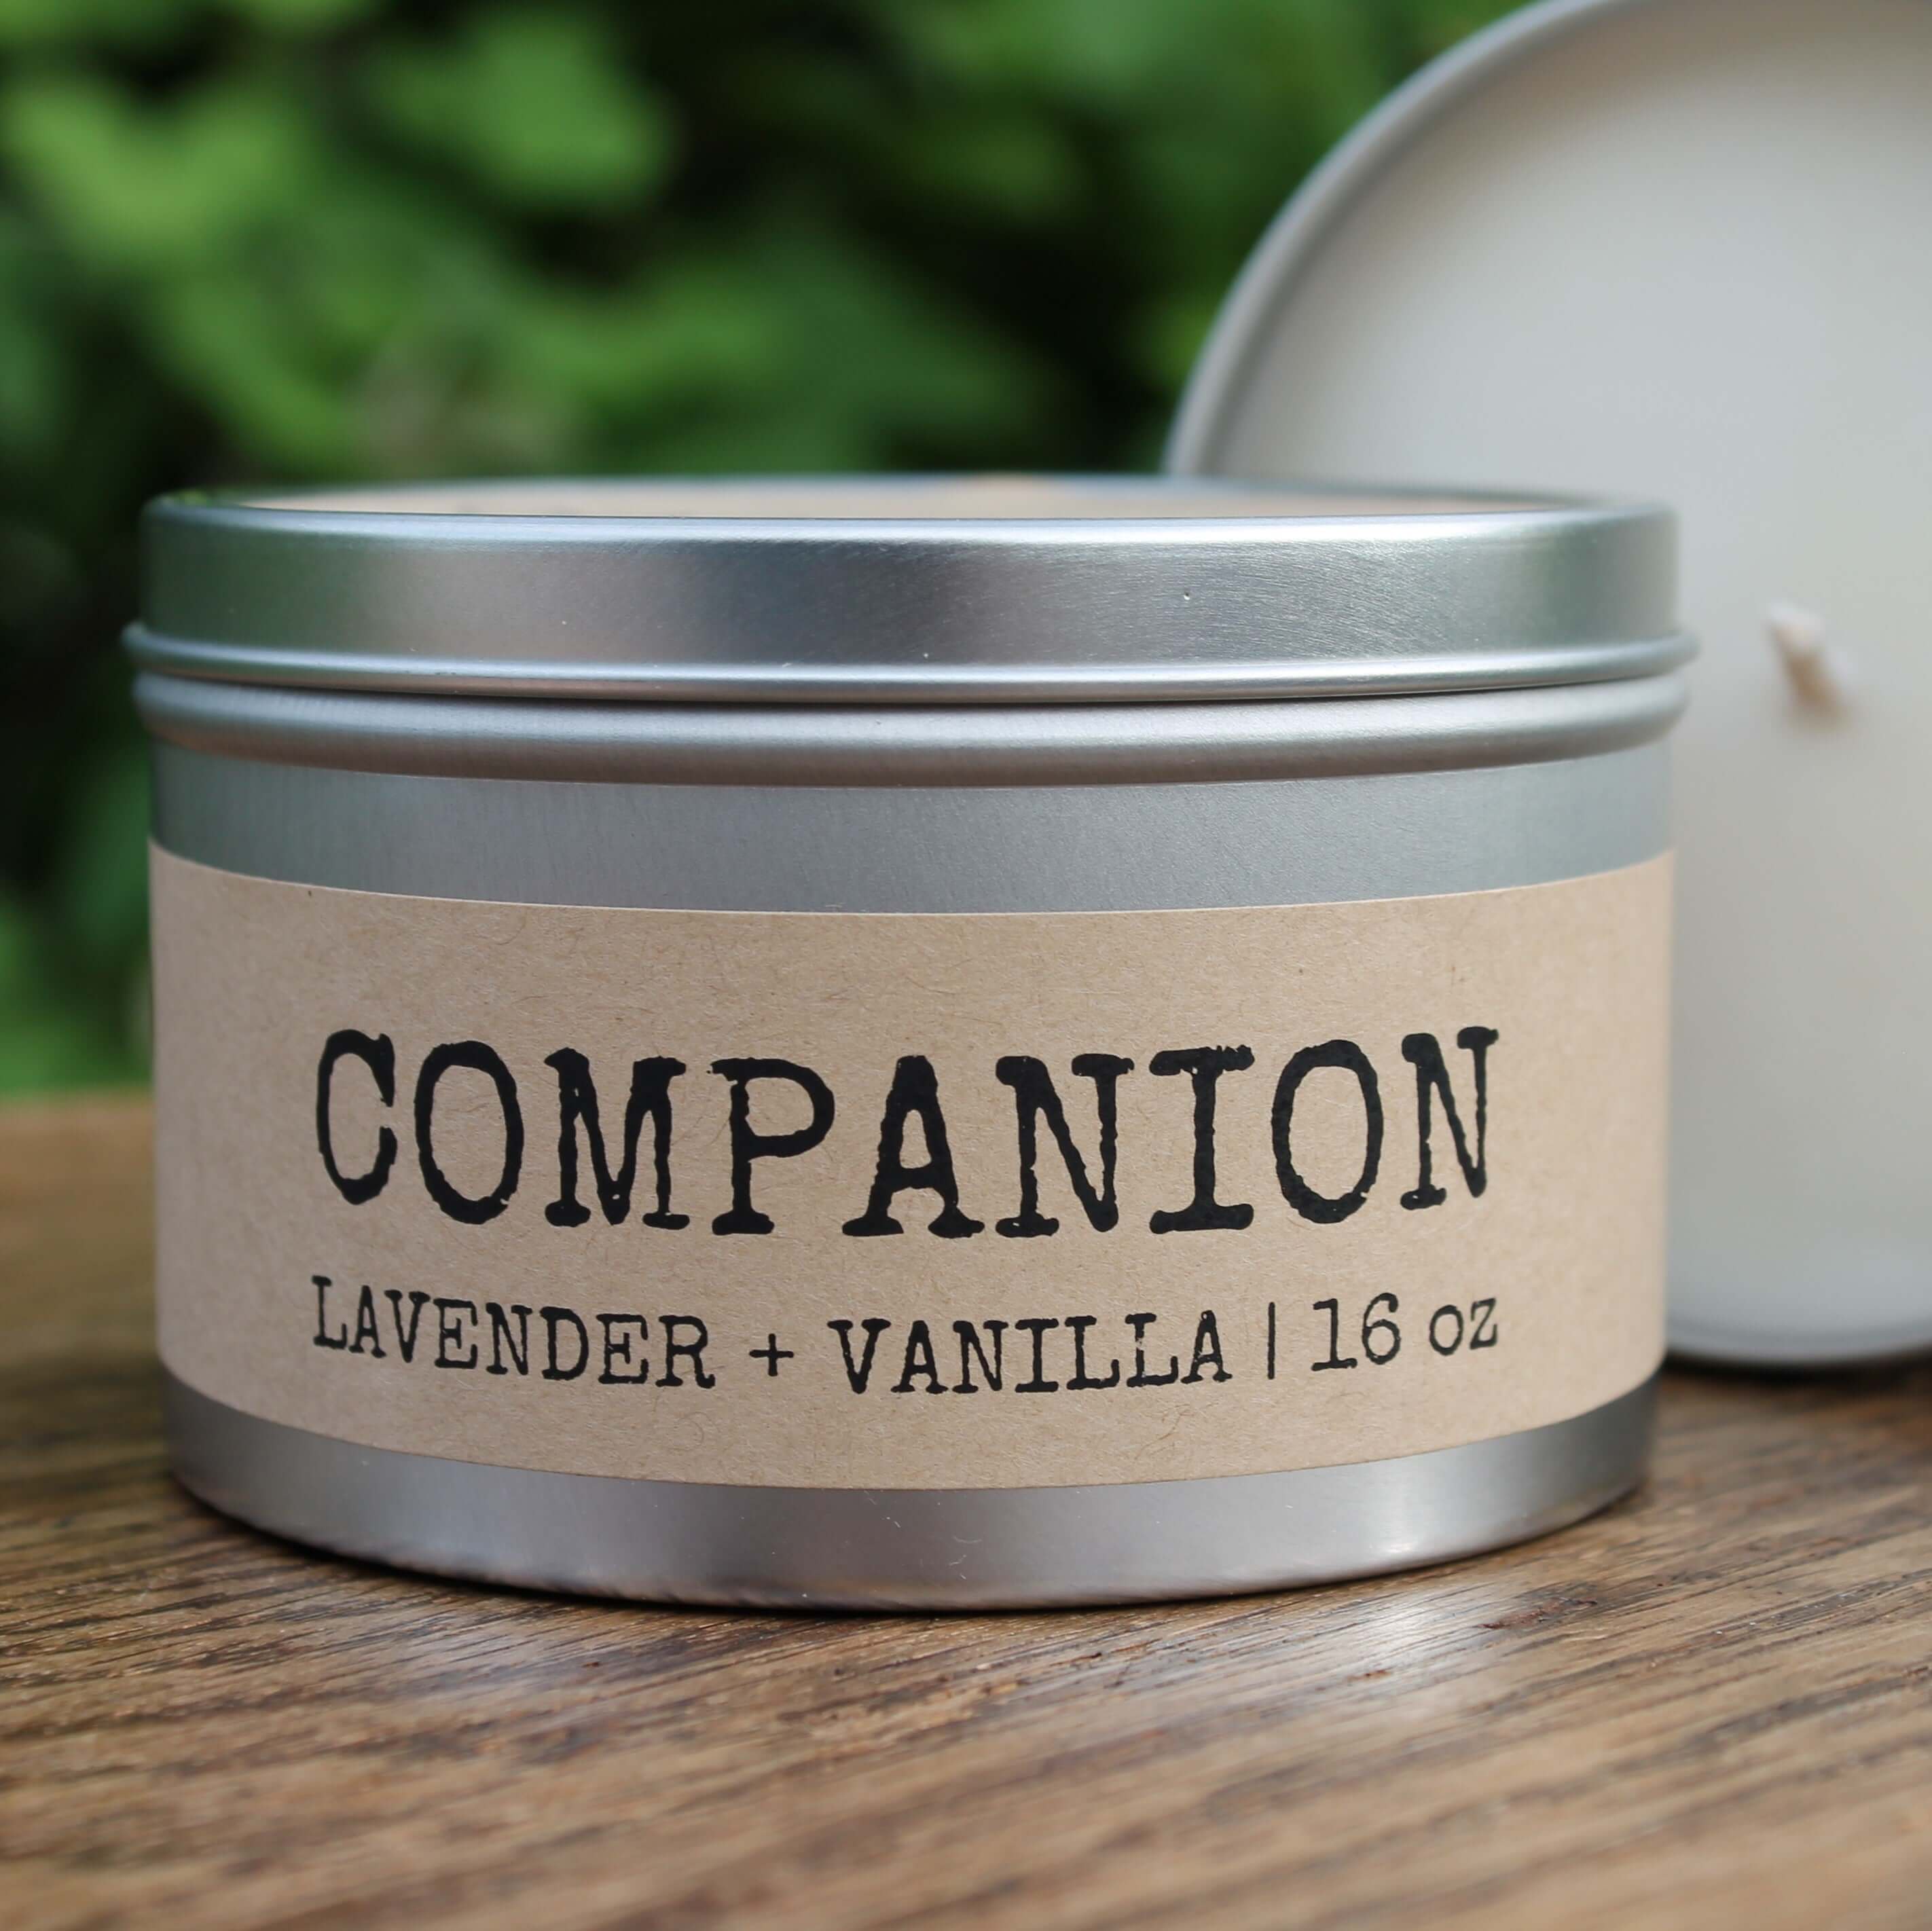 refillable soy candle, companies that donate to non-profits, companion soy candle, lavender soy candle, vanilla soy candle, companion 16 oz candle, long lasting candles, candles with a strong throw